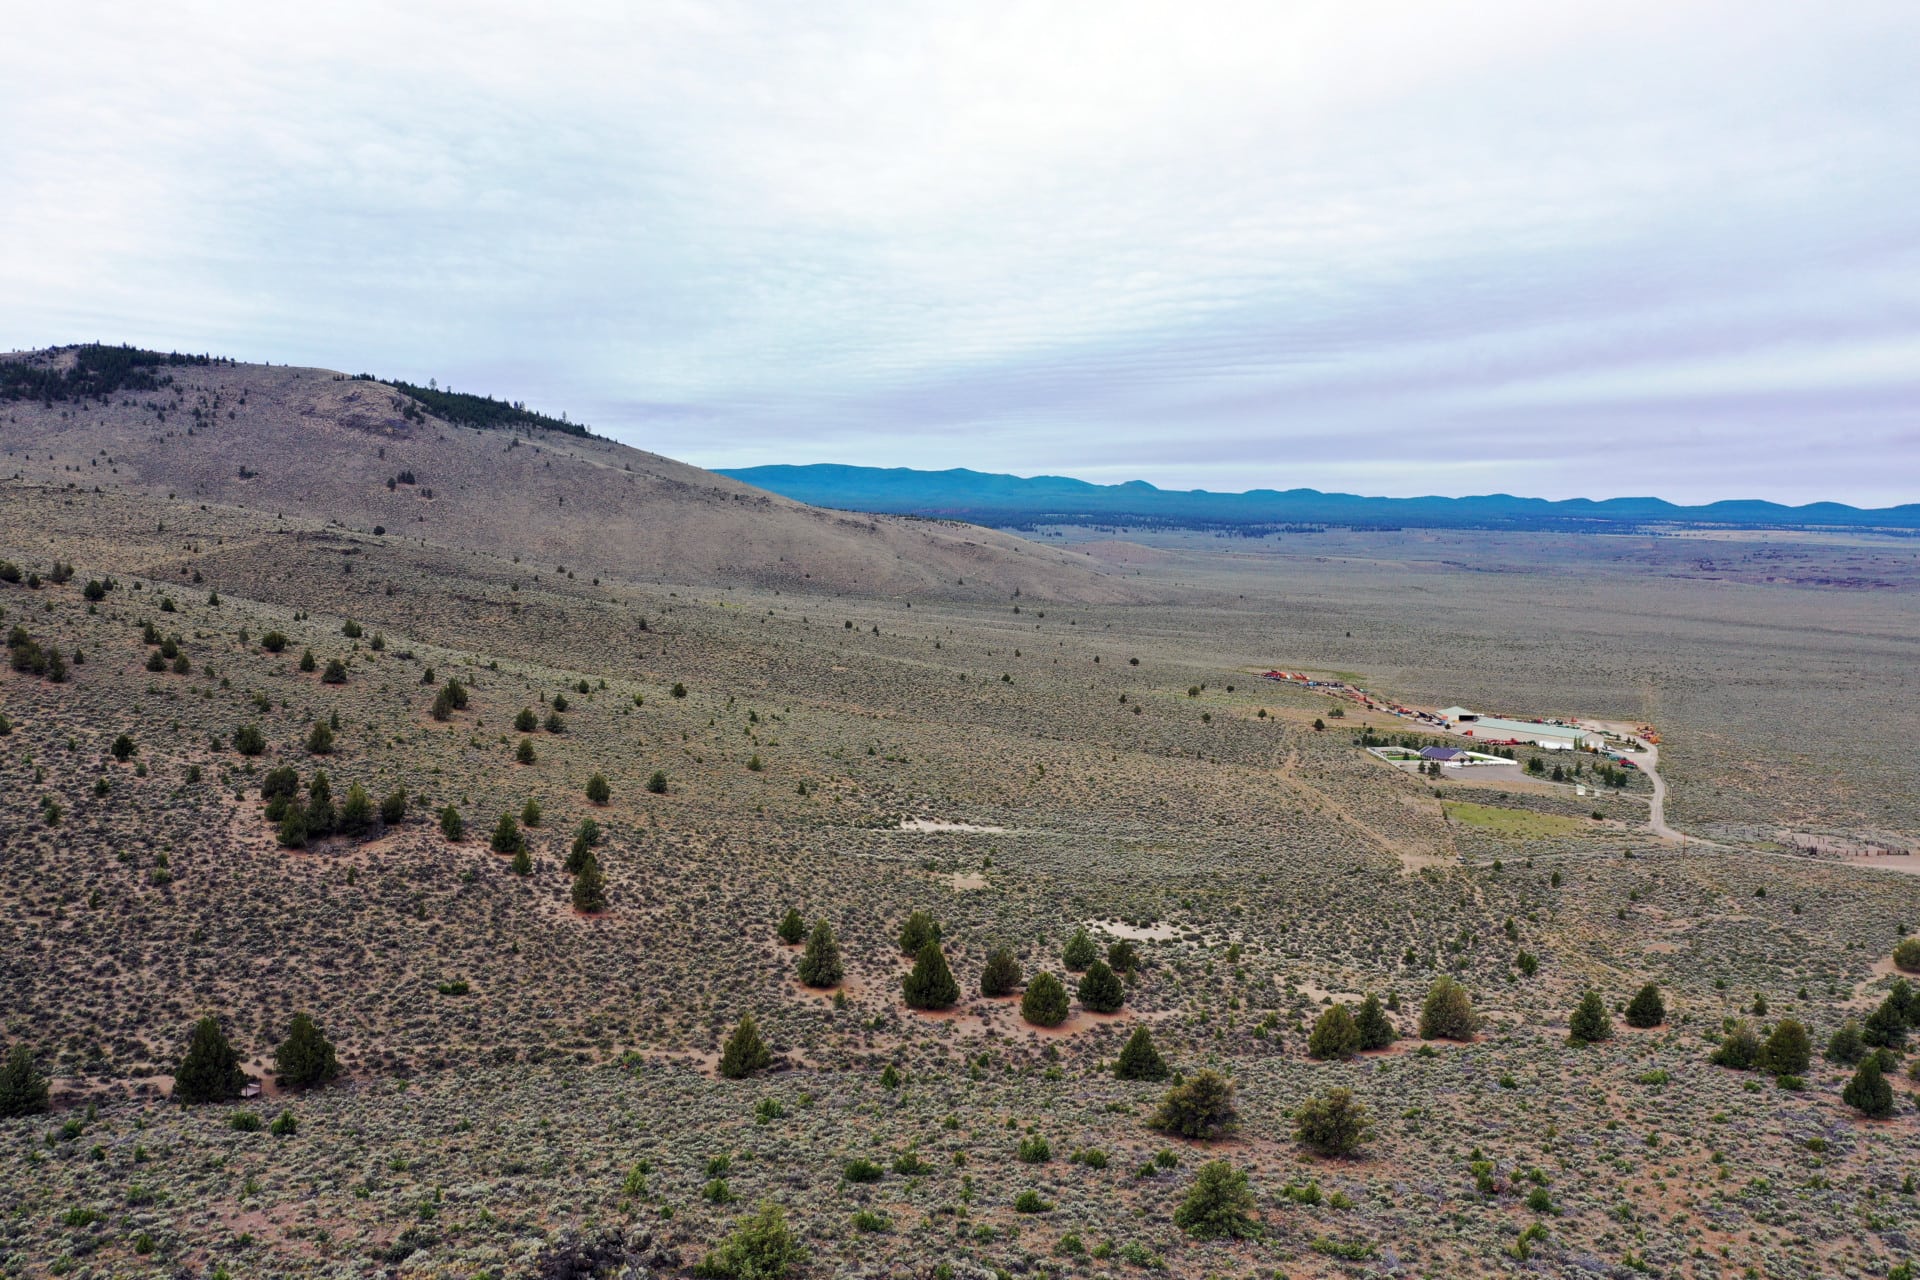 access to thousands of acres of public lands oregon pine mountain ranch